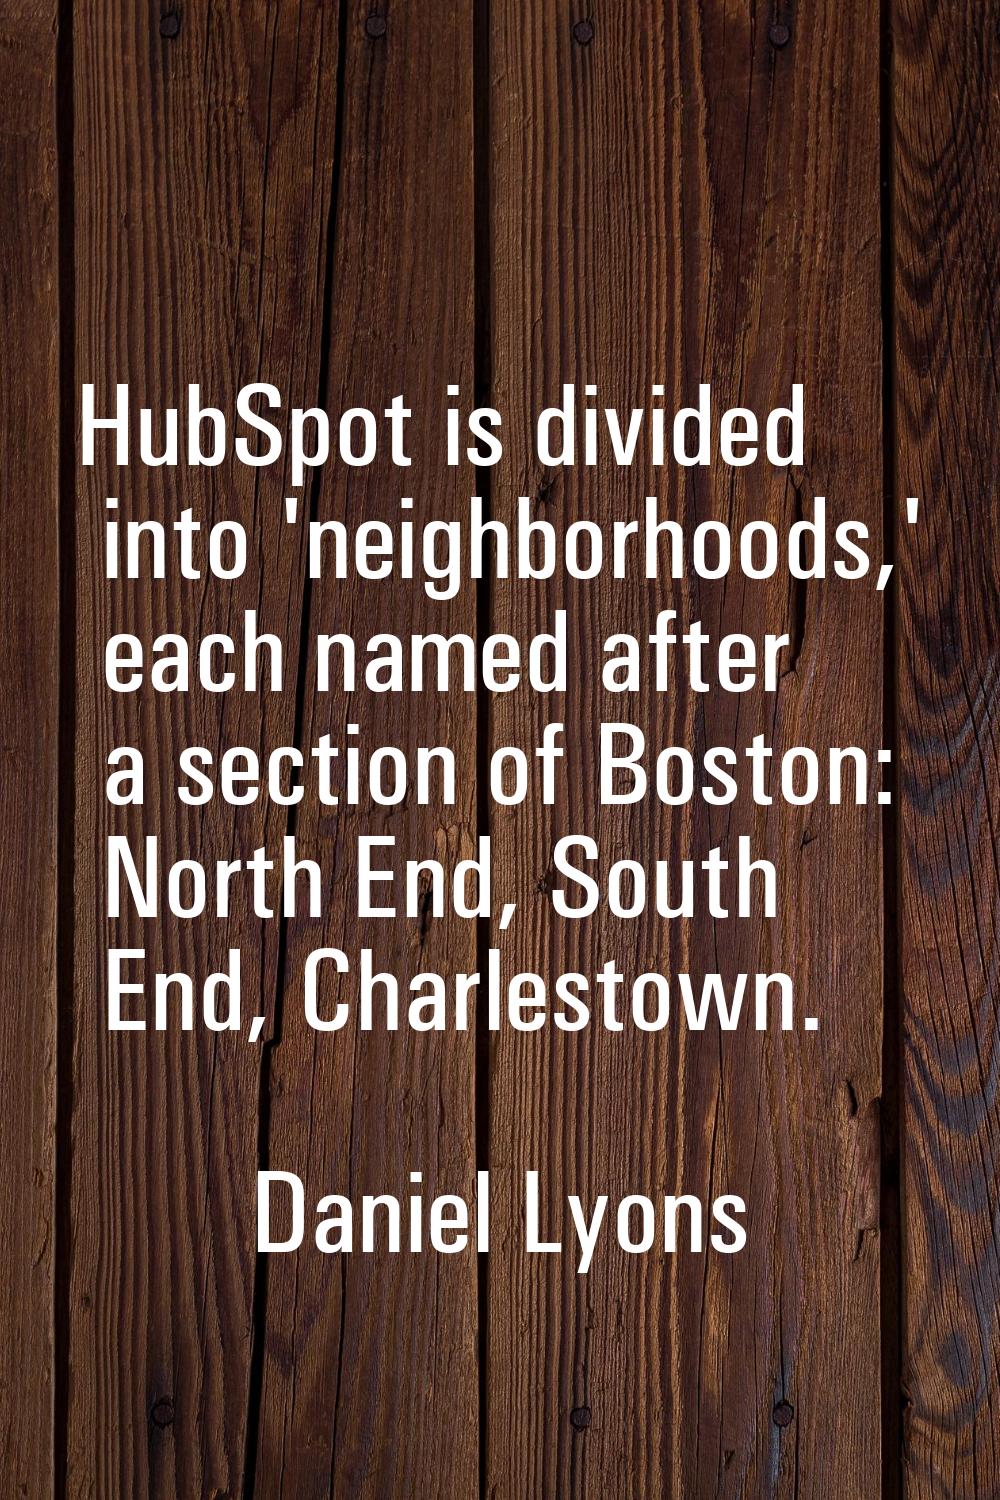 HubSpot is divided into 'neighborhoods,' each named after a section of Boston: North End, South End